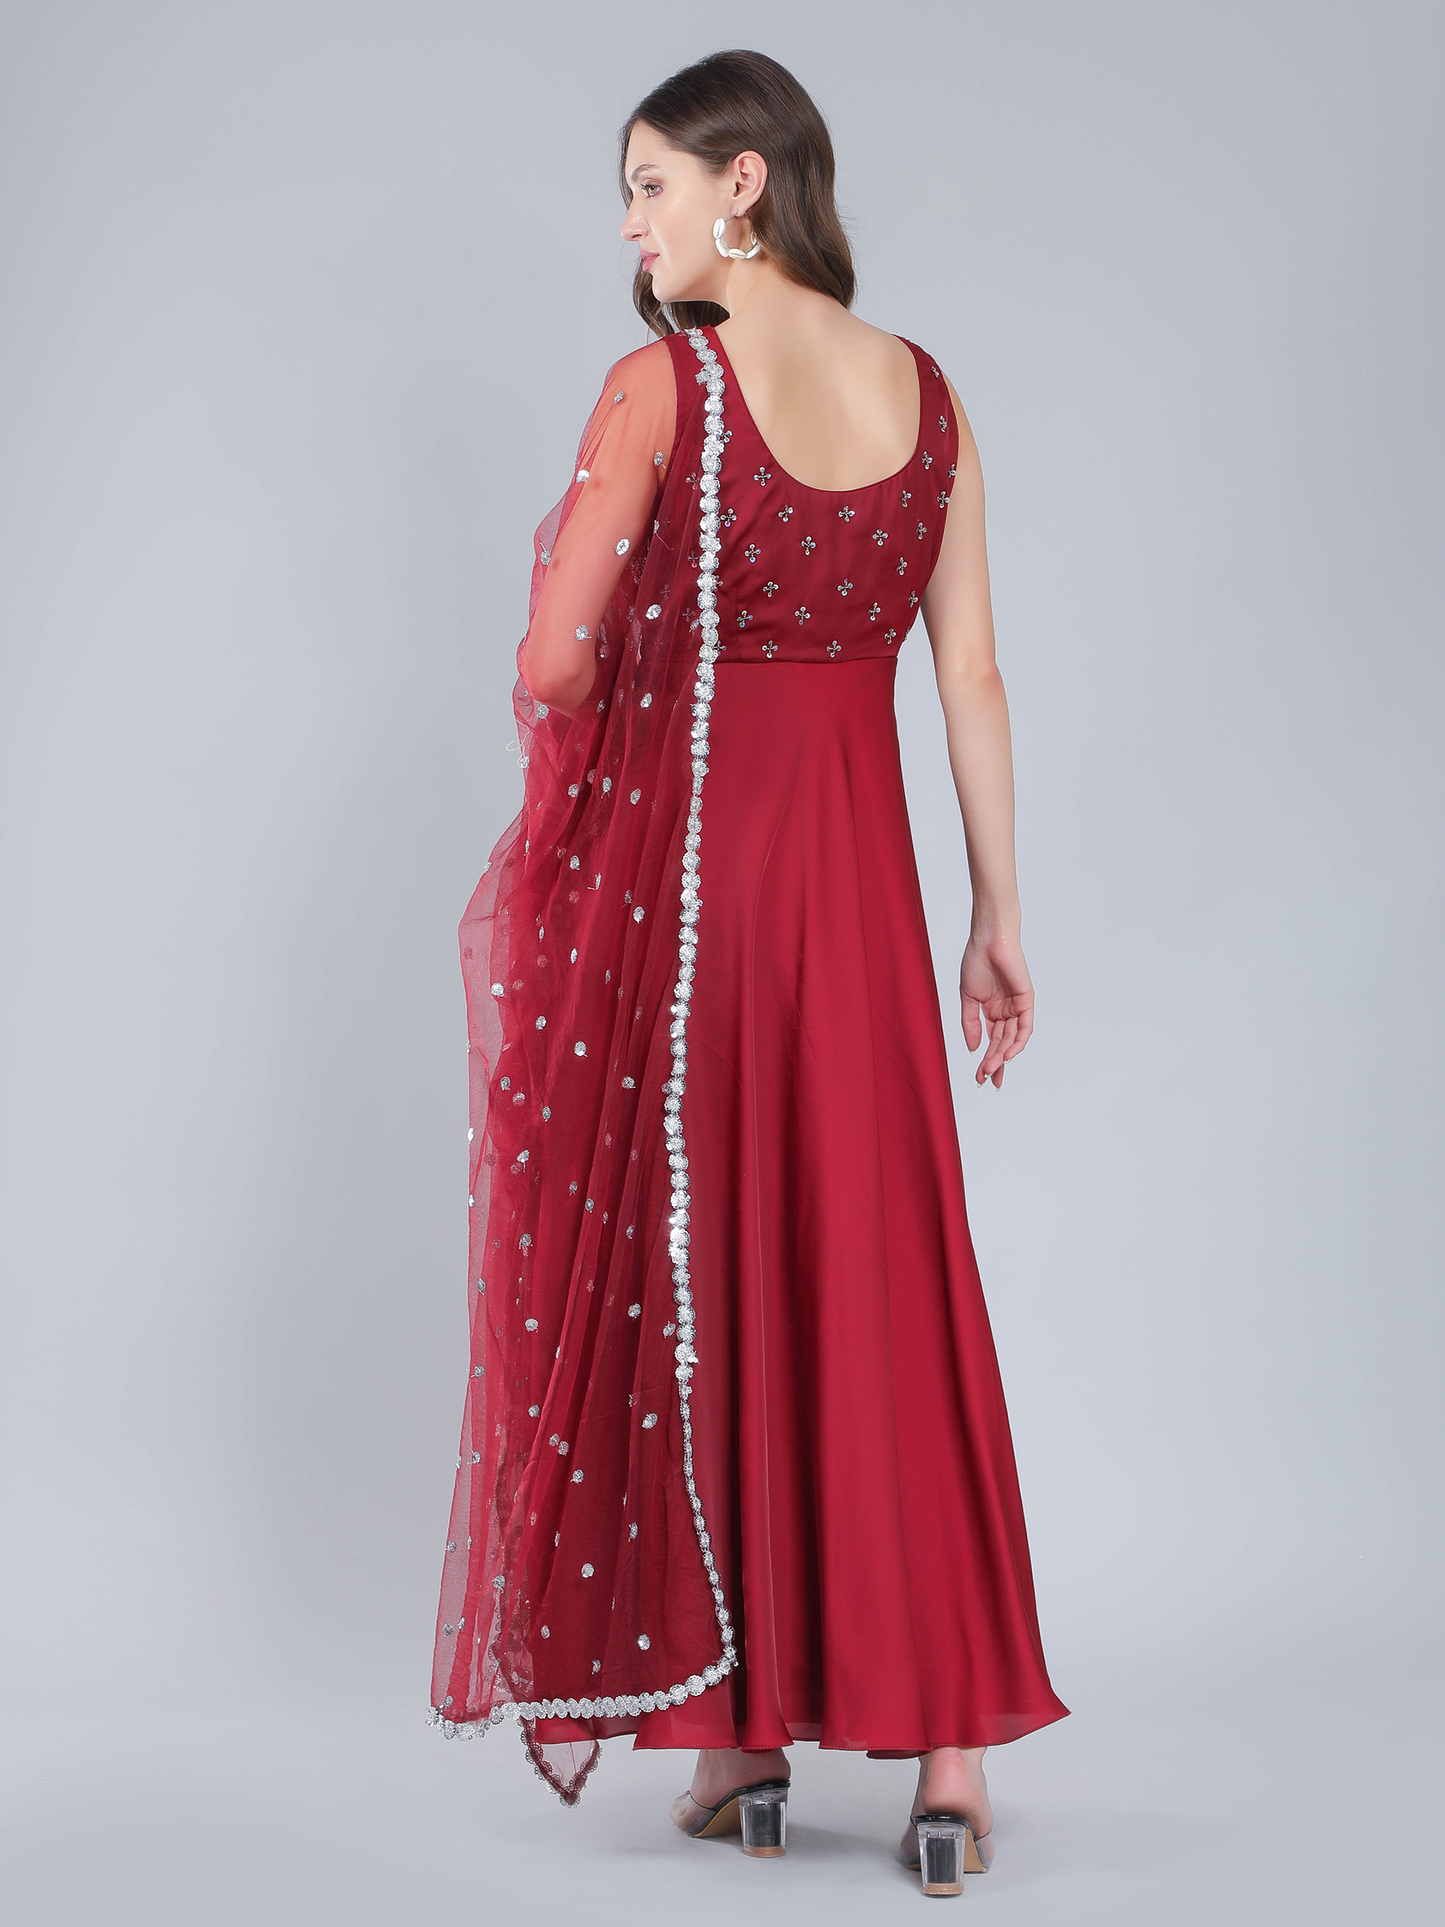 Cherry red hand embroidered gown